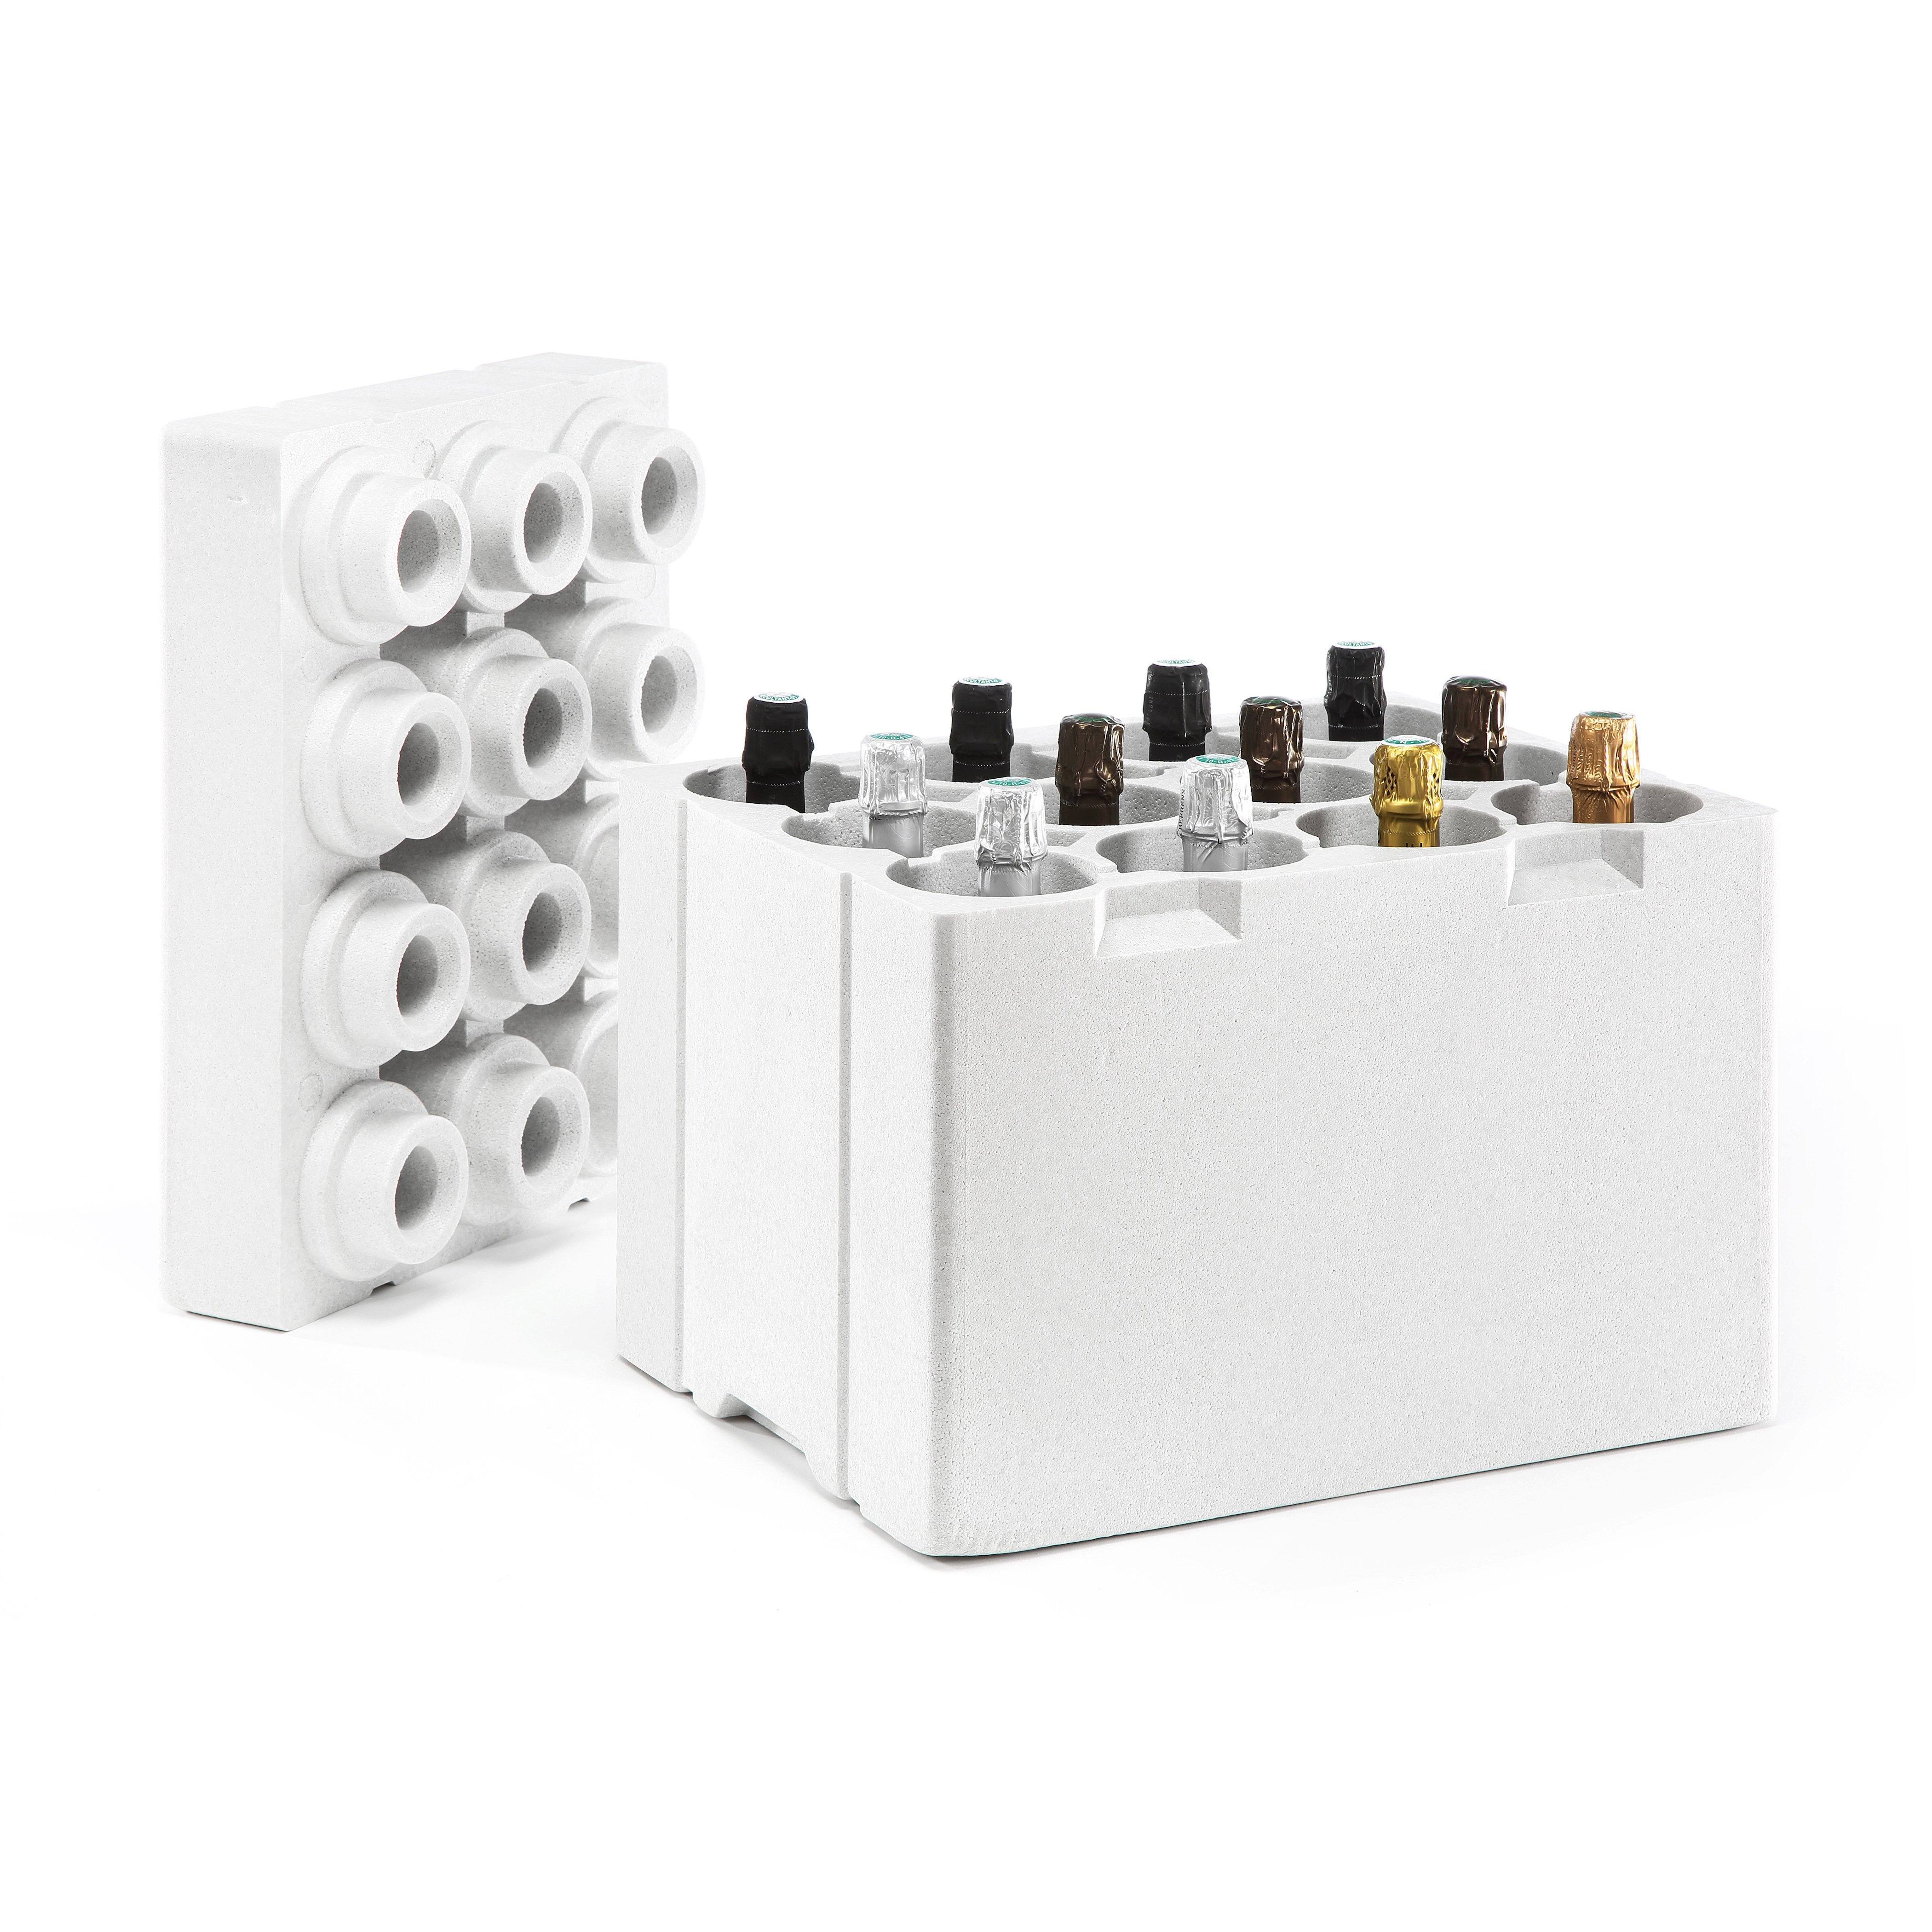 12-Bottle Wine Box For Shipping & Plane Transport - INSERT REPLACEMENT FOR YOUR WINE CHECK LUGGAGE